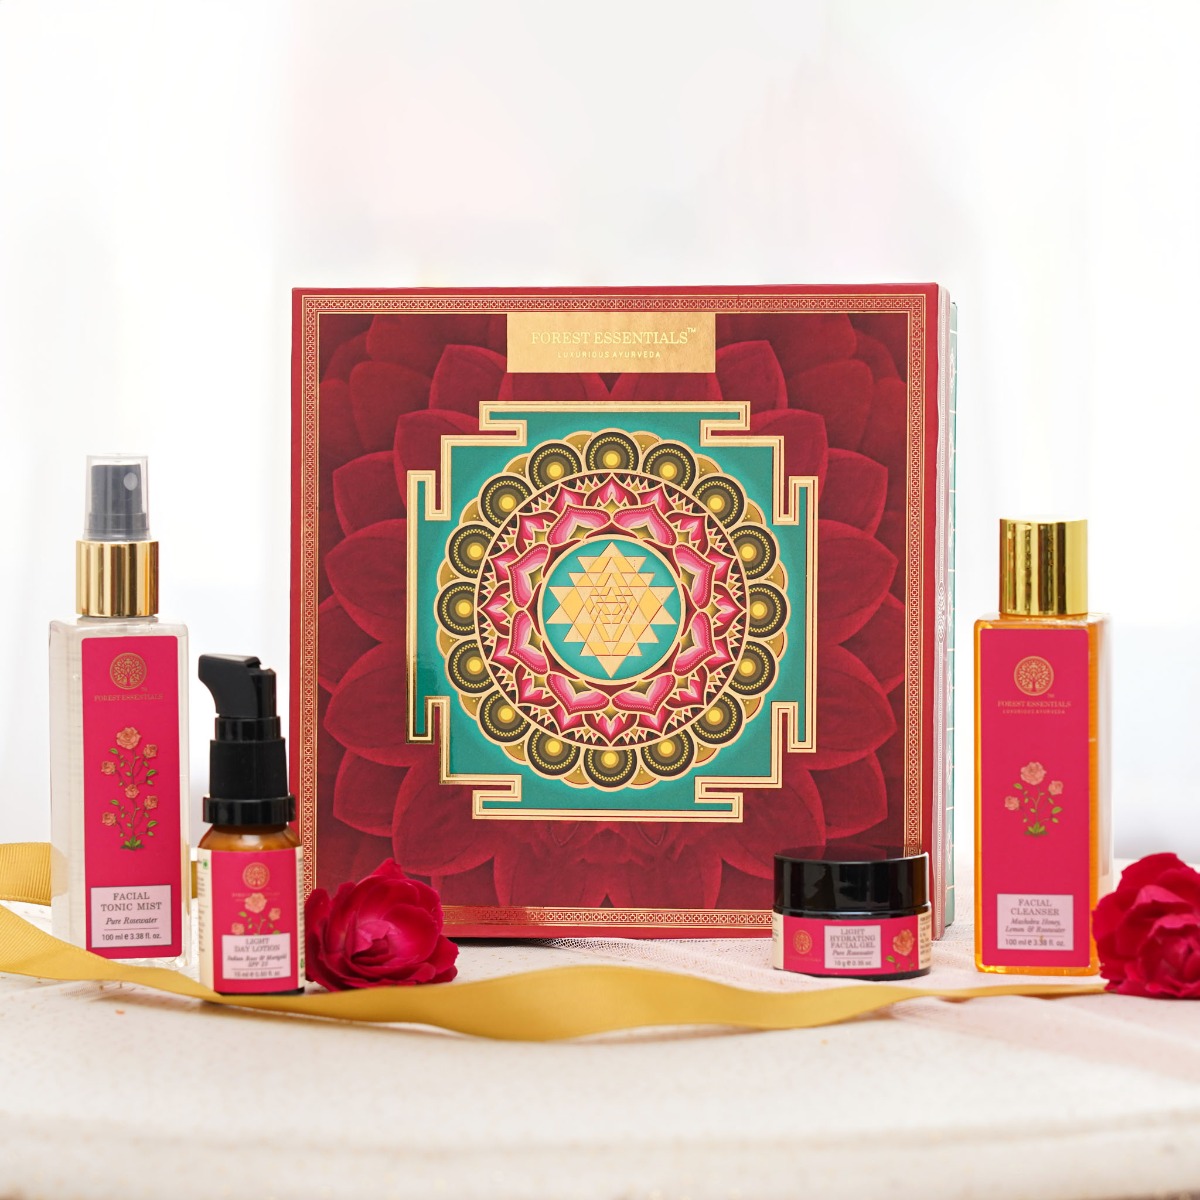 Forest Essentials Adorns The Festive Season With Multisensory Beauty,  Inspired By The Sacred Power of Indian Symbolism